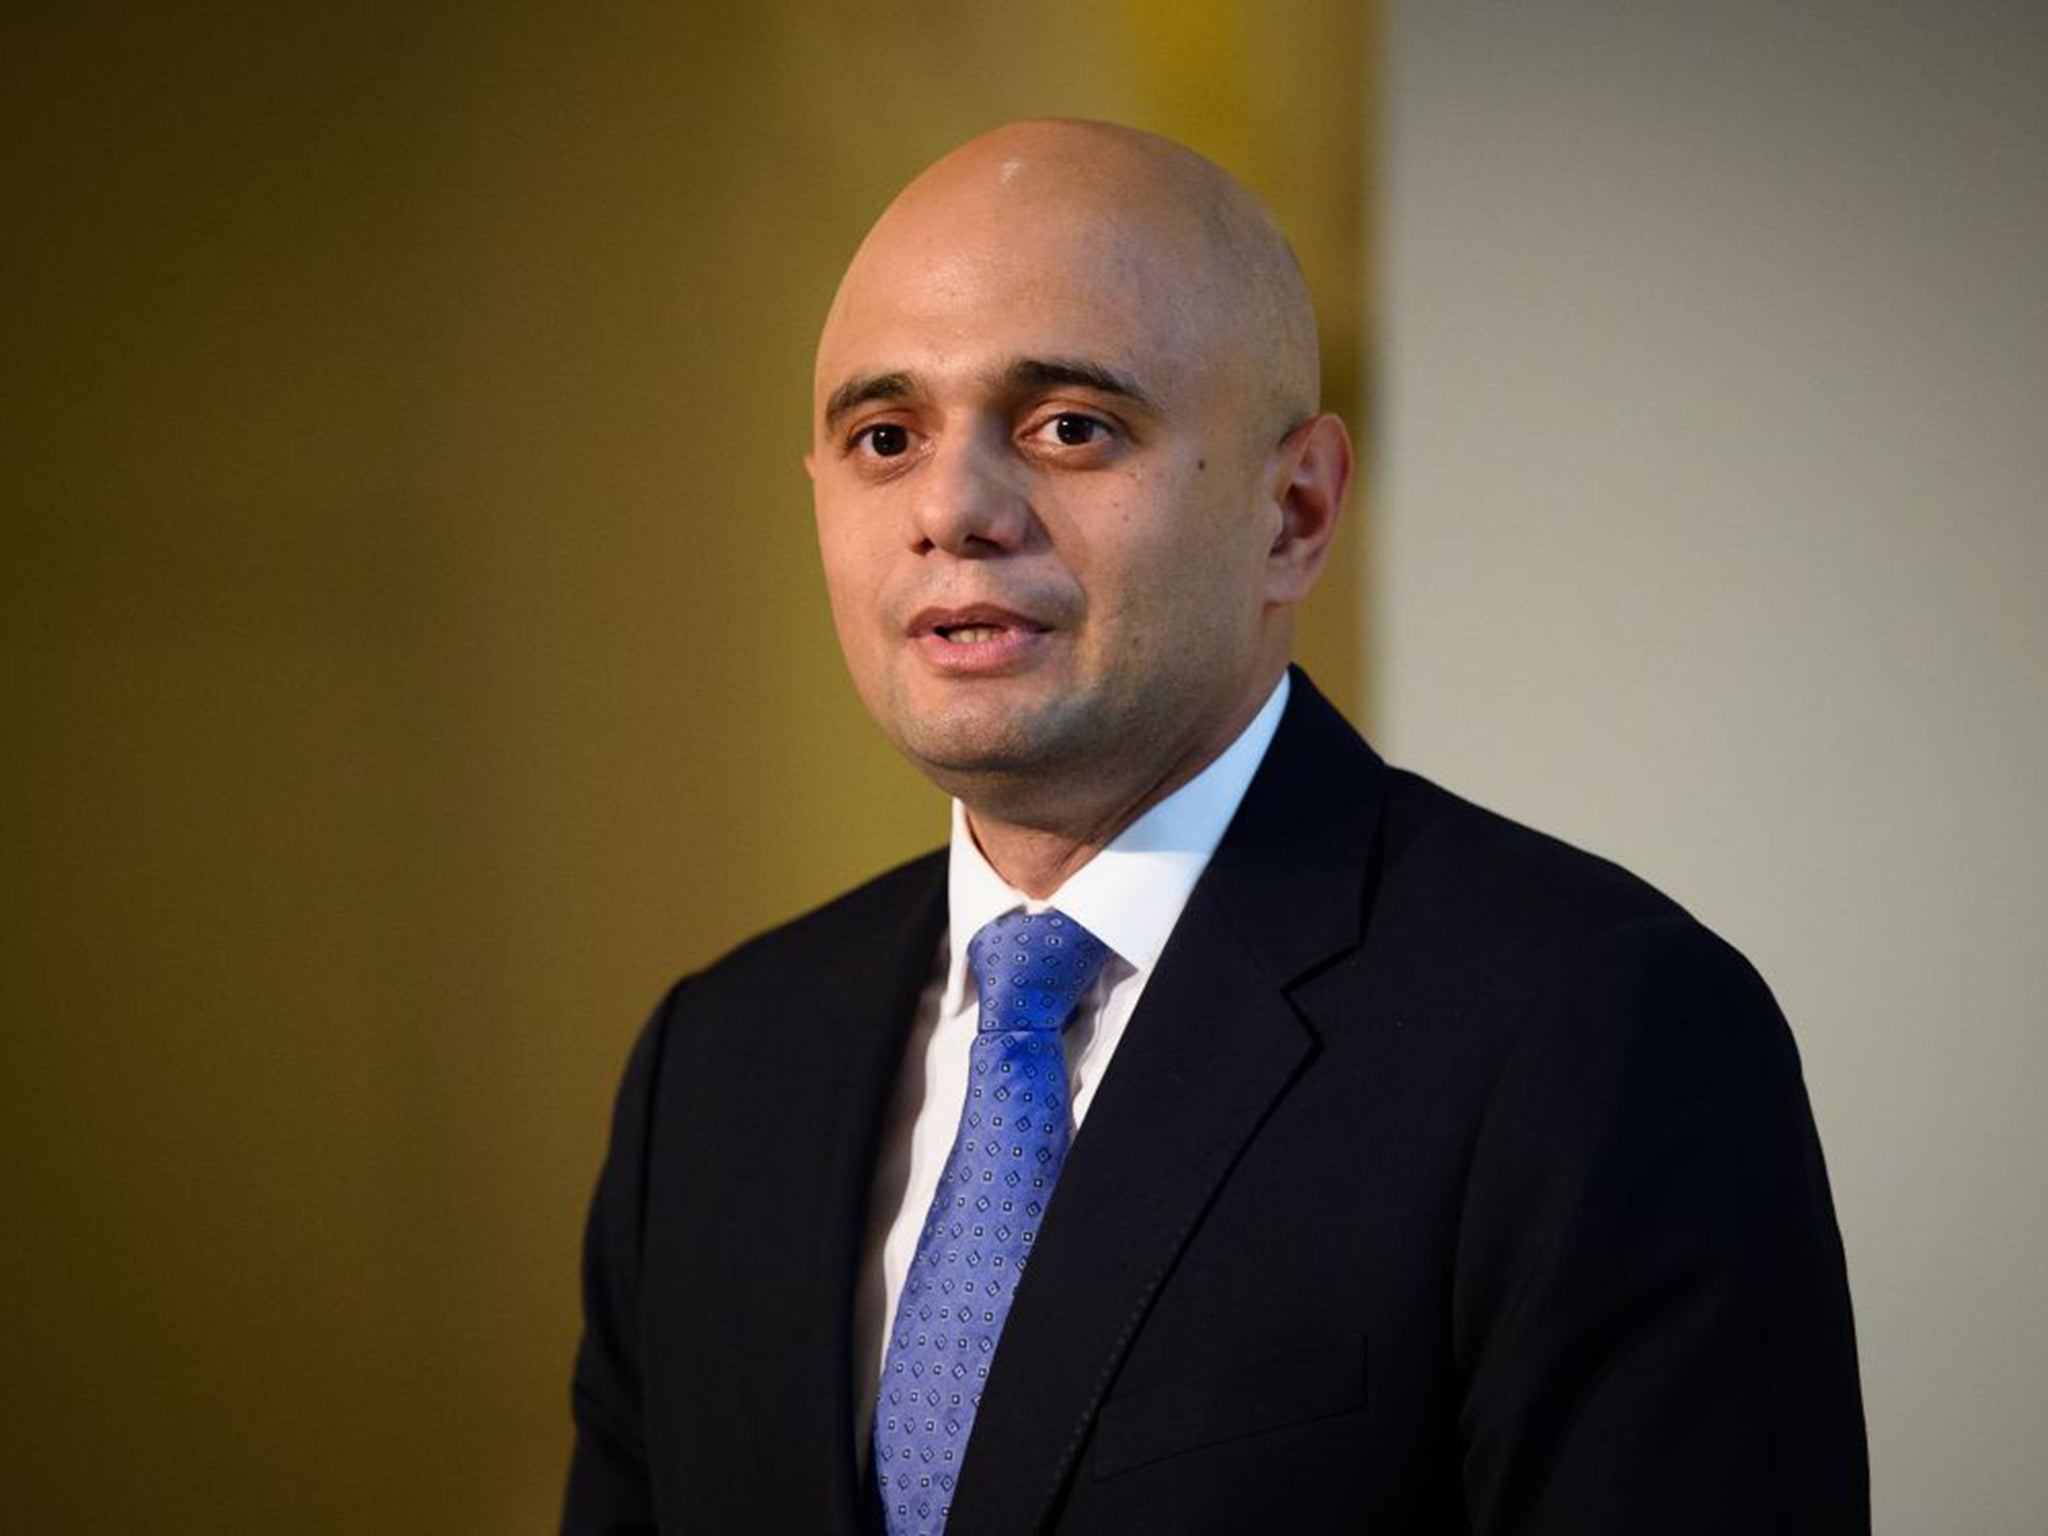 Mr Javid says the Government should take advantage of record low interest rates